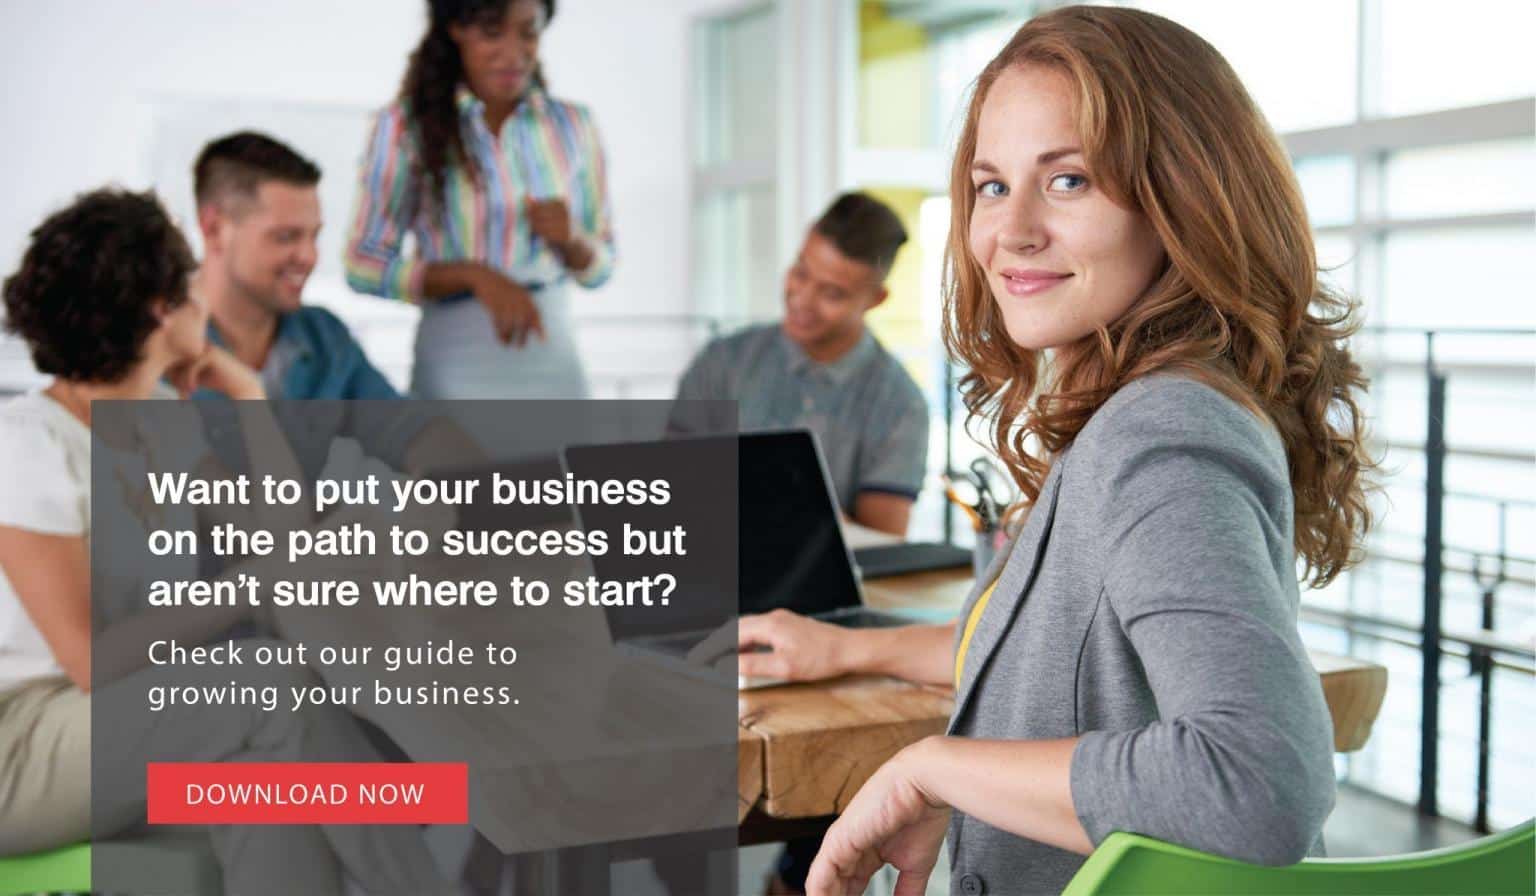 Want to put your business on the path to success but aren't sure where to start? Check out our guide to growing your business.